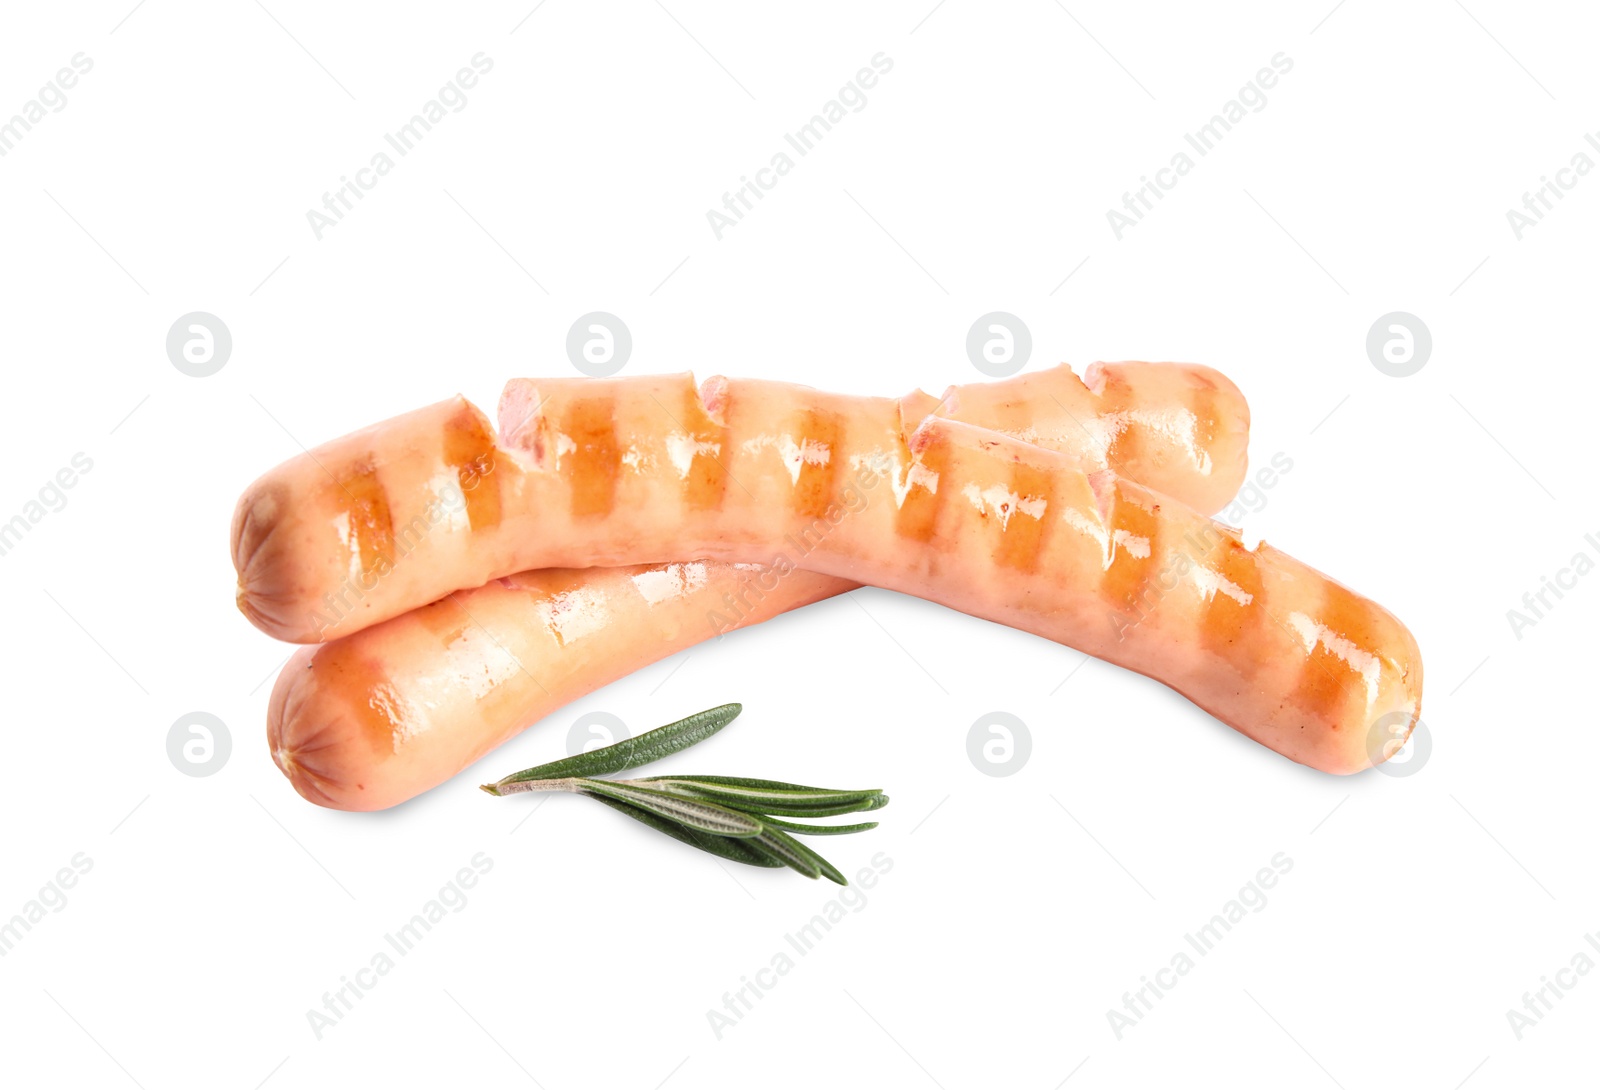 Photo of Grilled sausages and rosemary isolated on white